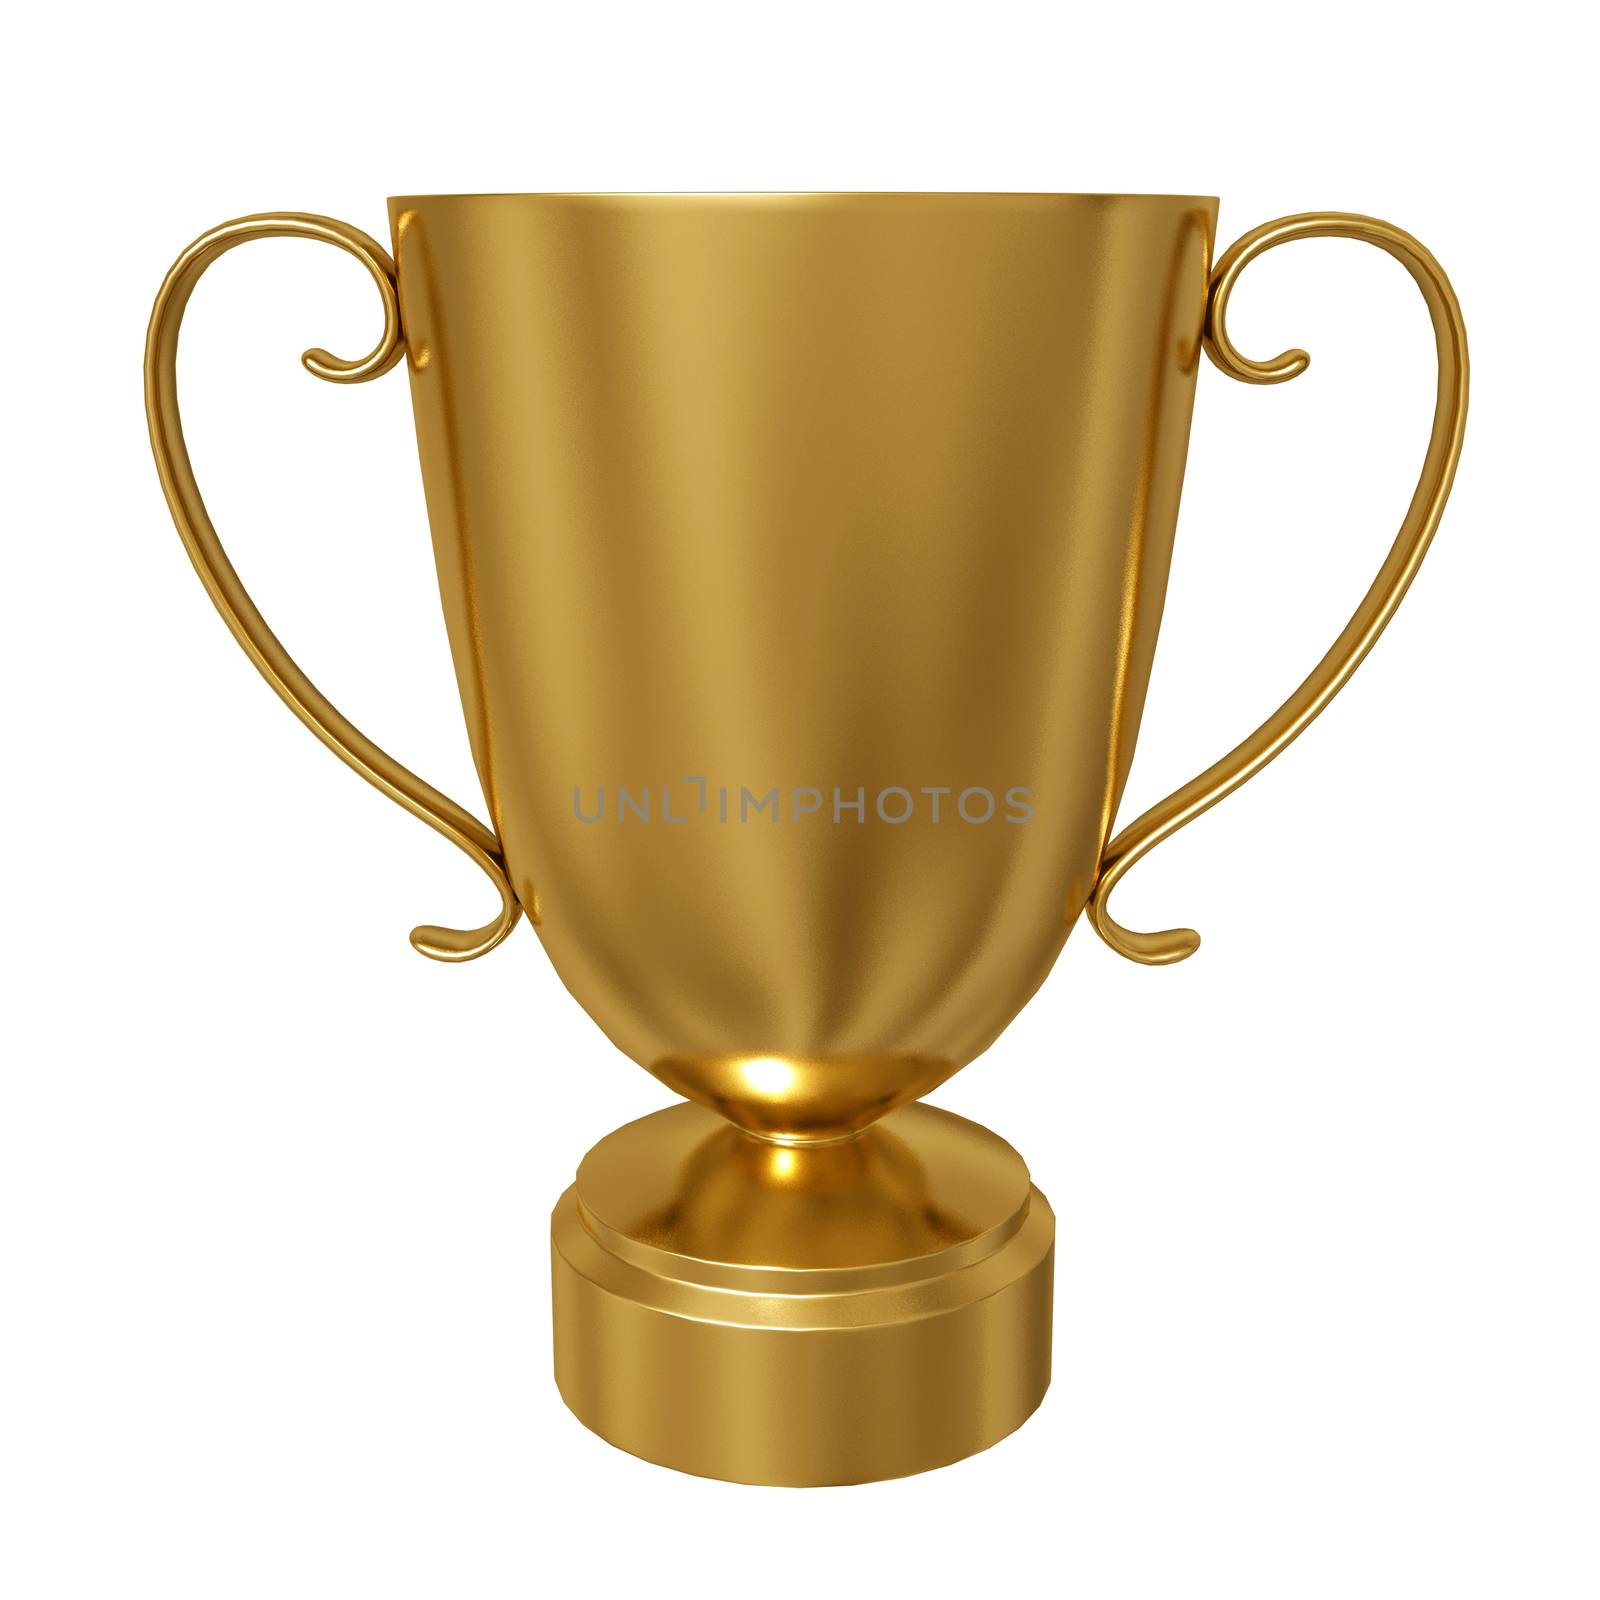 Gold trophy cup against a white background by Balefire9